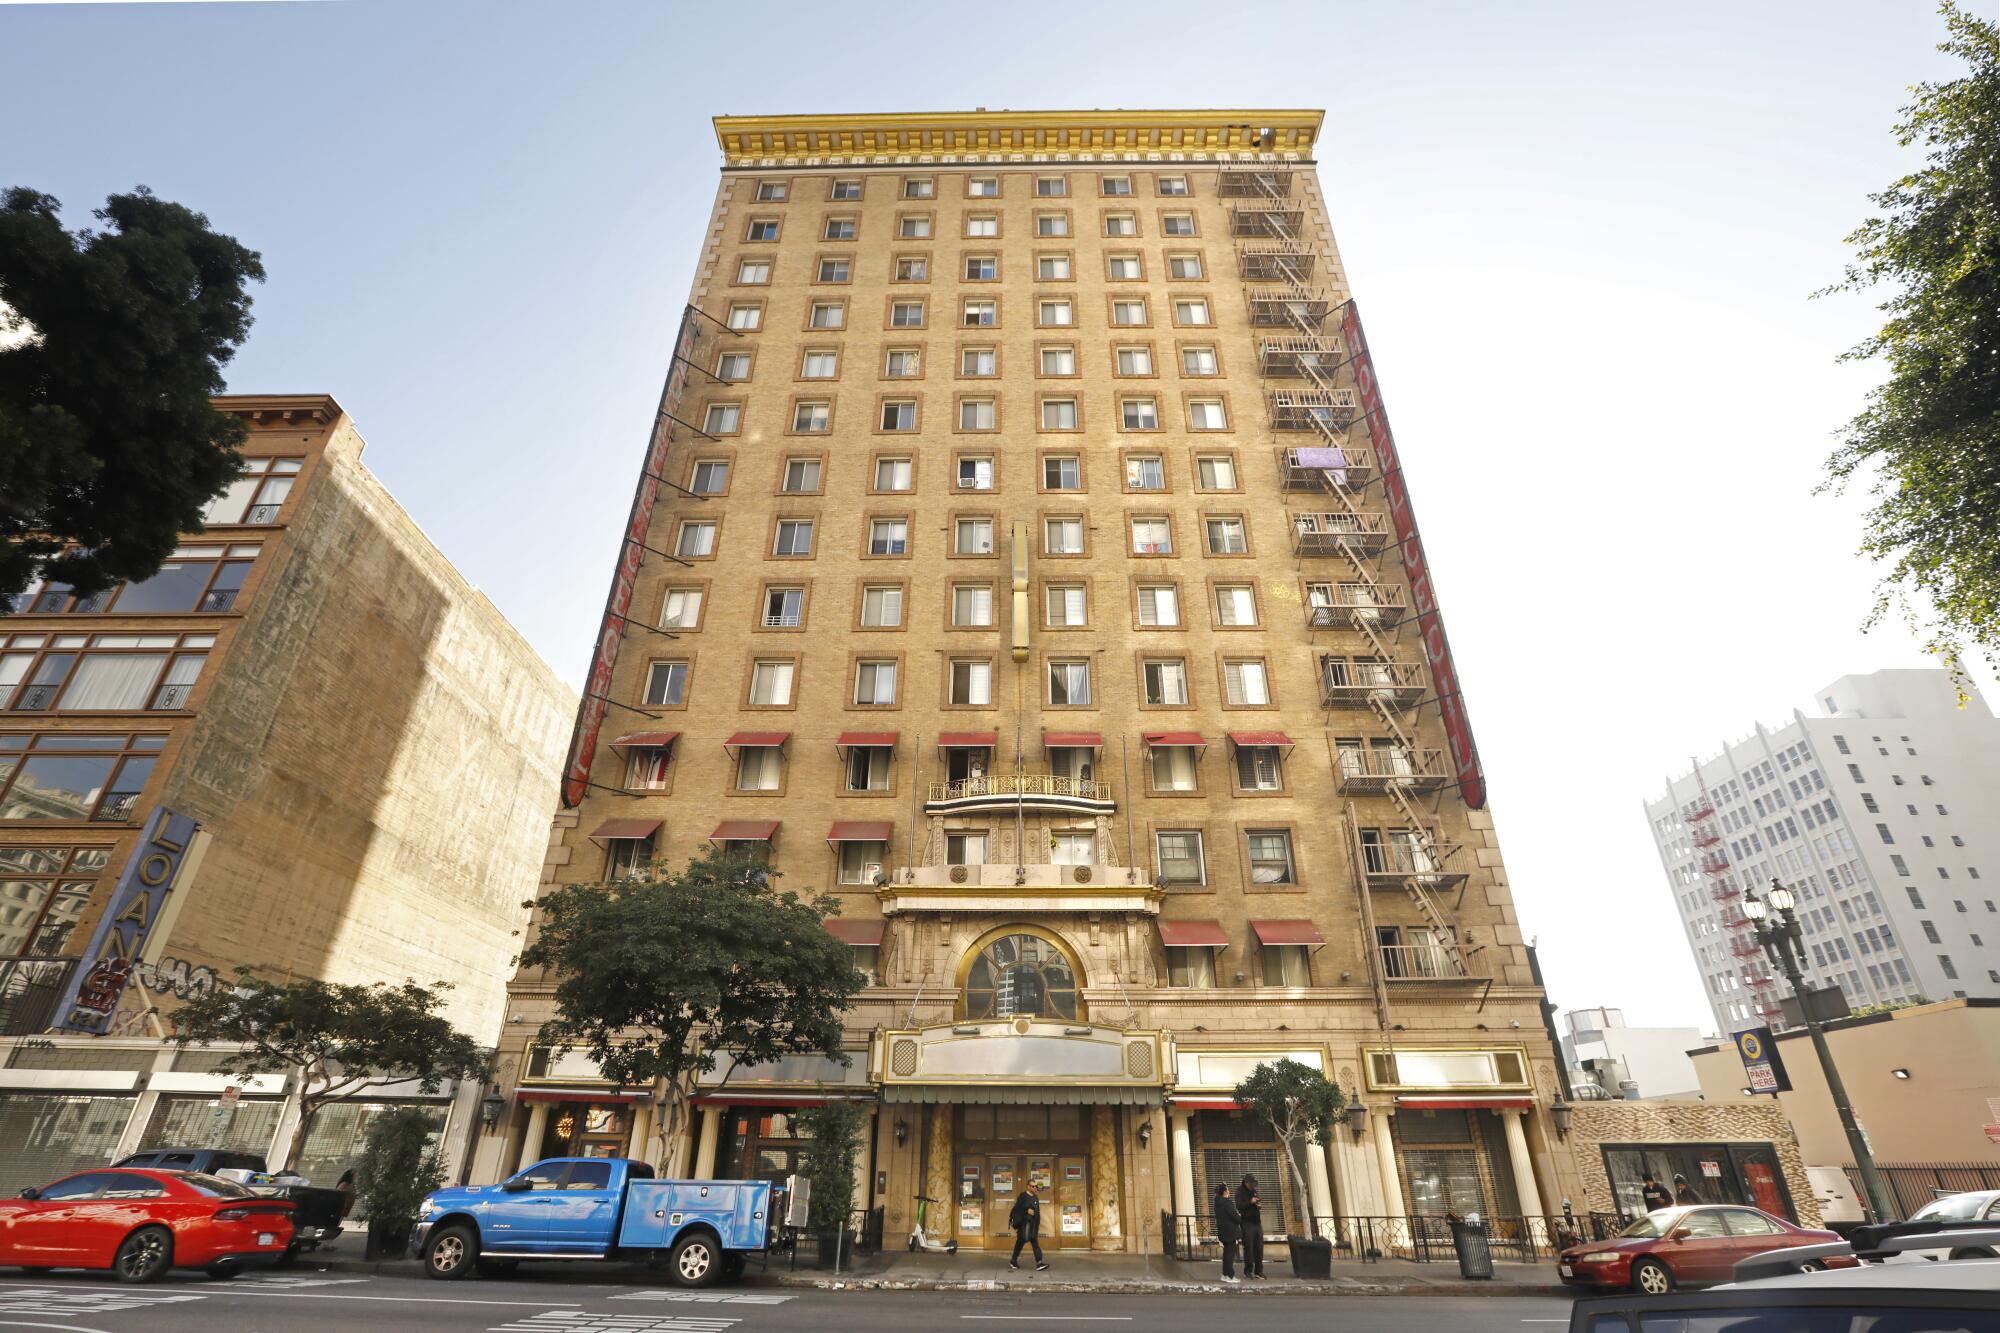 The Cecil Hotel in downtown Los Angeles.